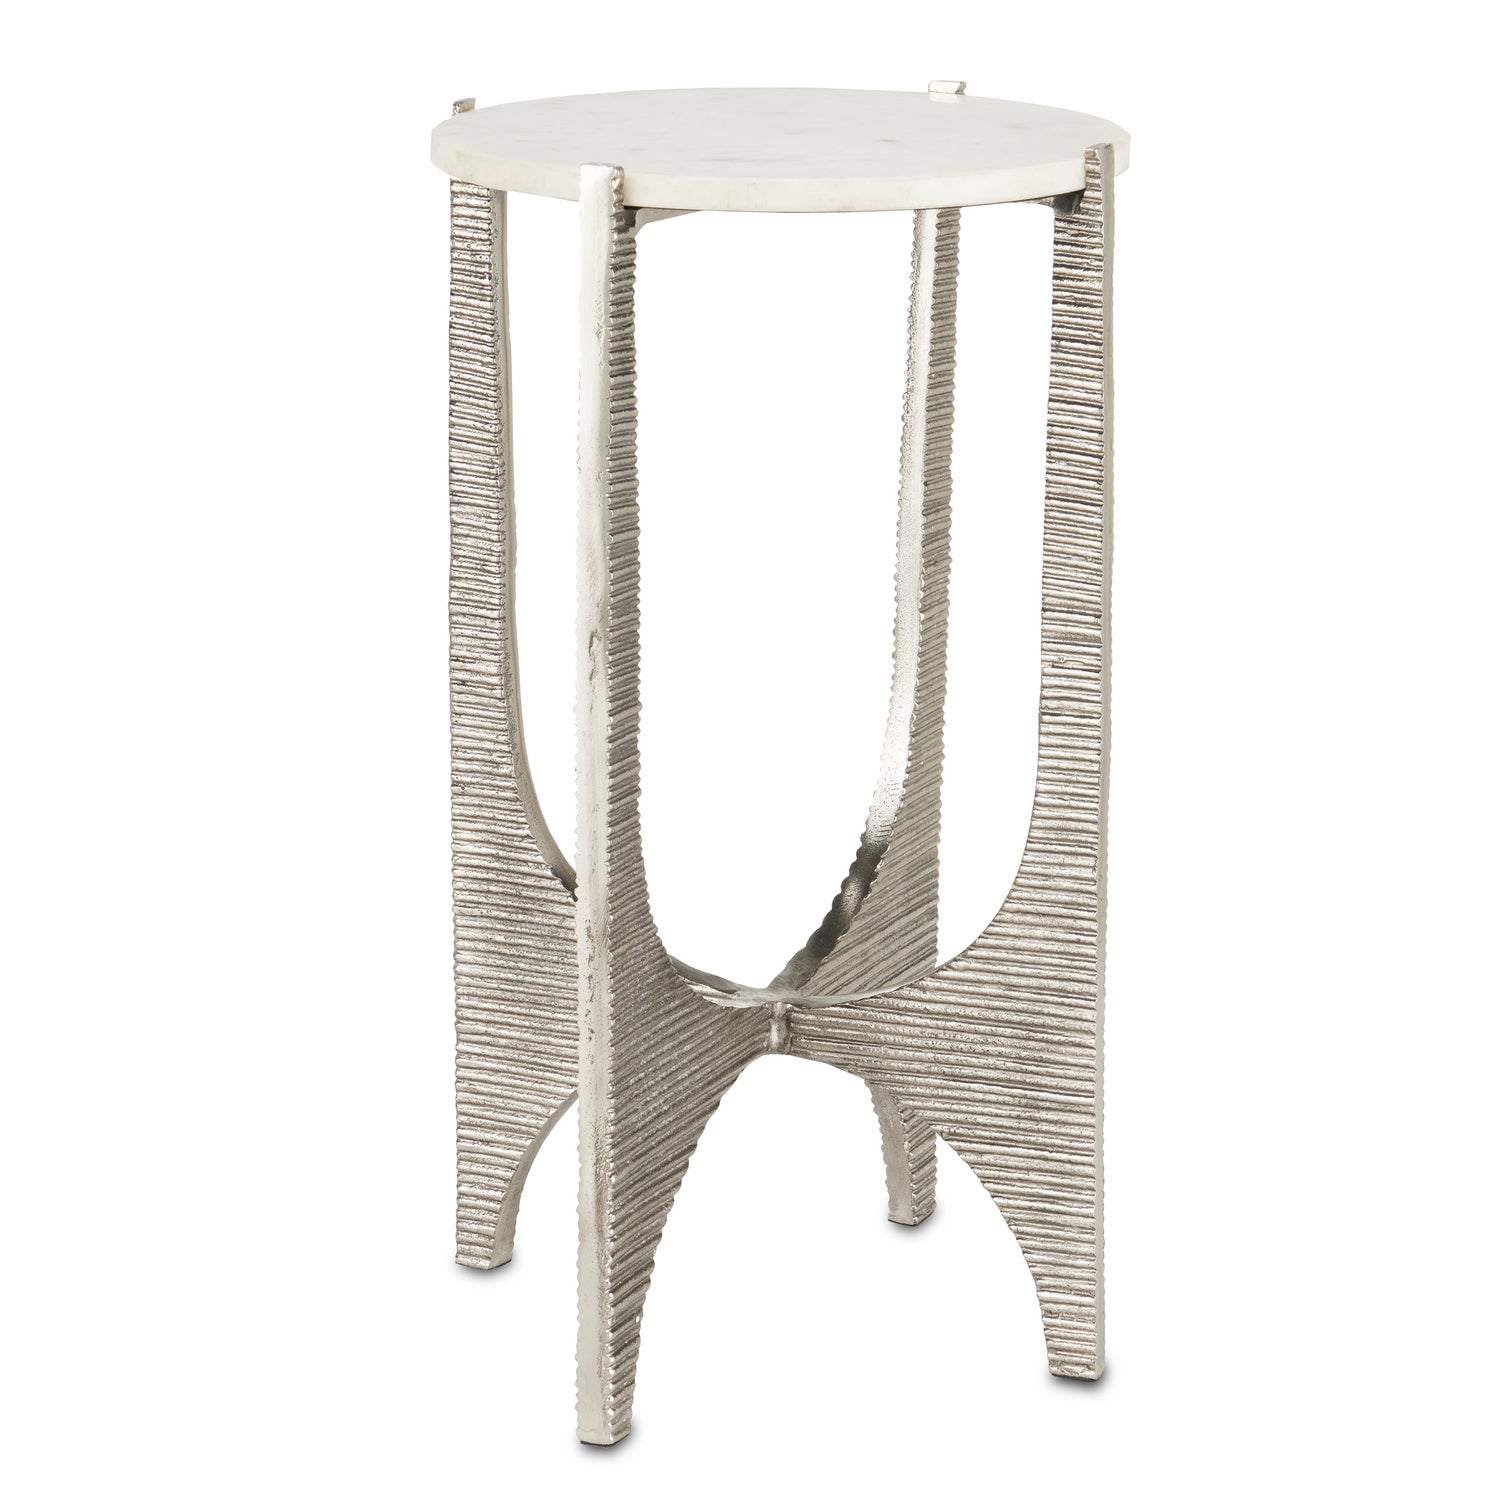 Accent Table from the Micha collection in Antique Nickel/White finish